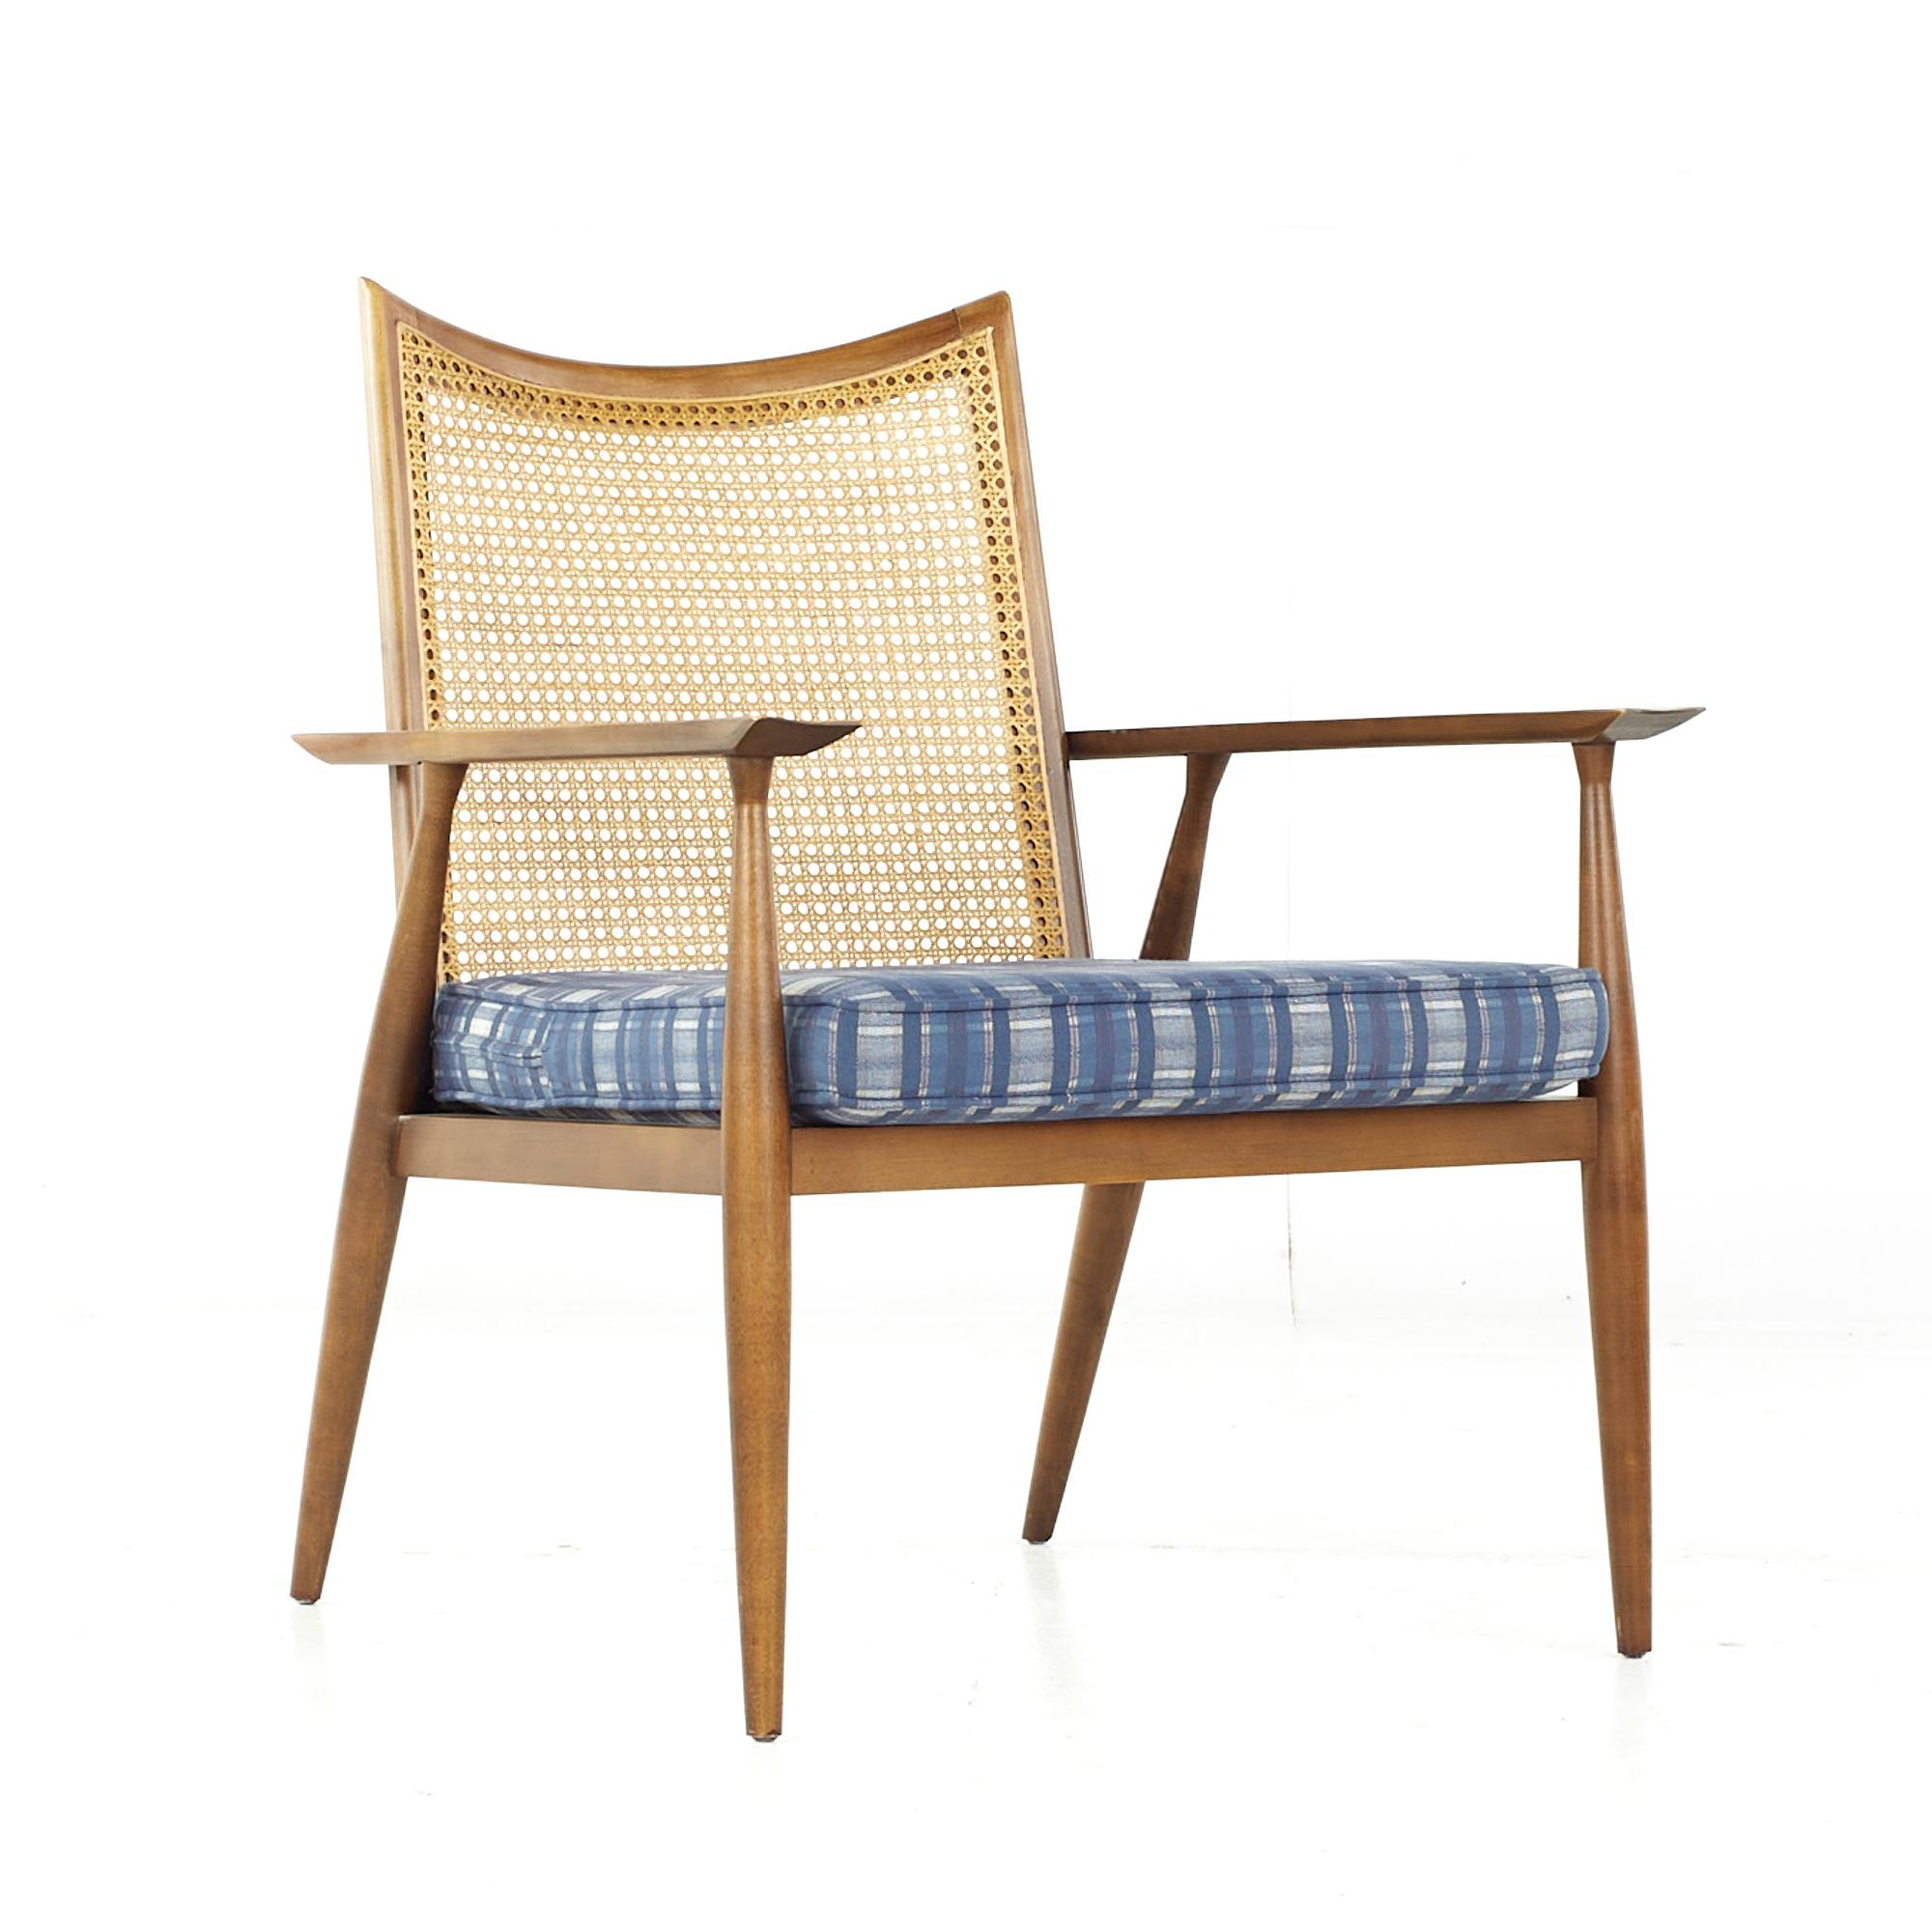 American Paul McCobb for Winchendon Mid-Century Cane and Walnut Lounge Chairs, Pair For Sale